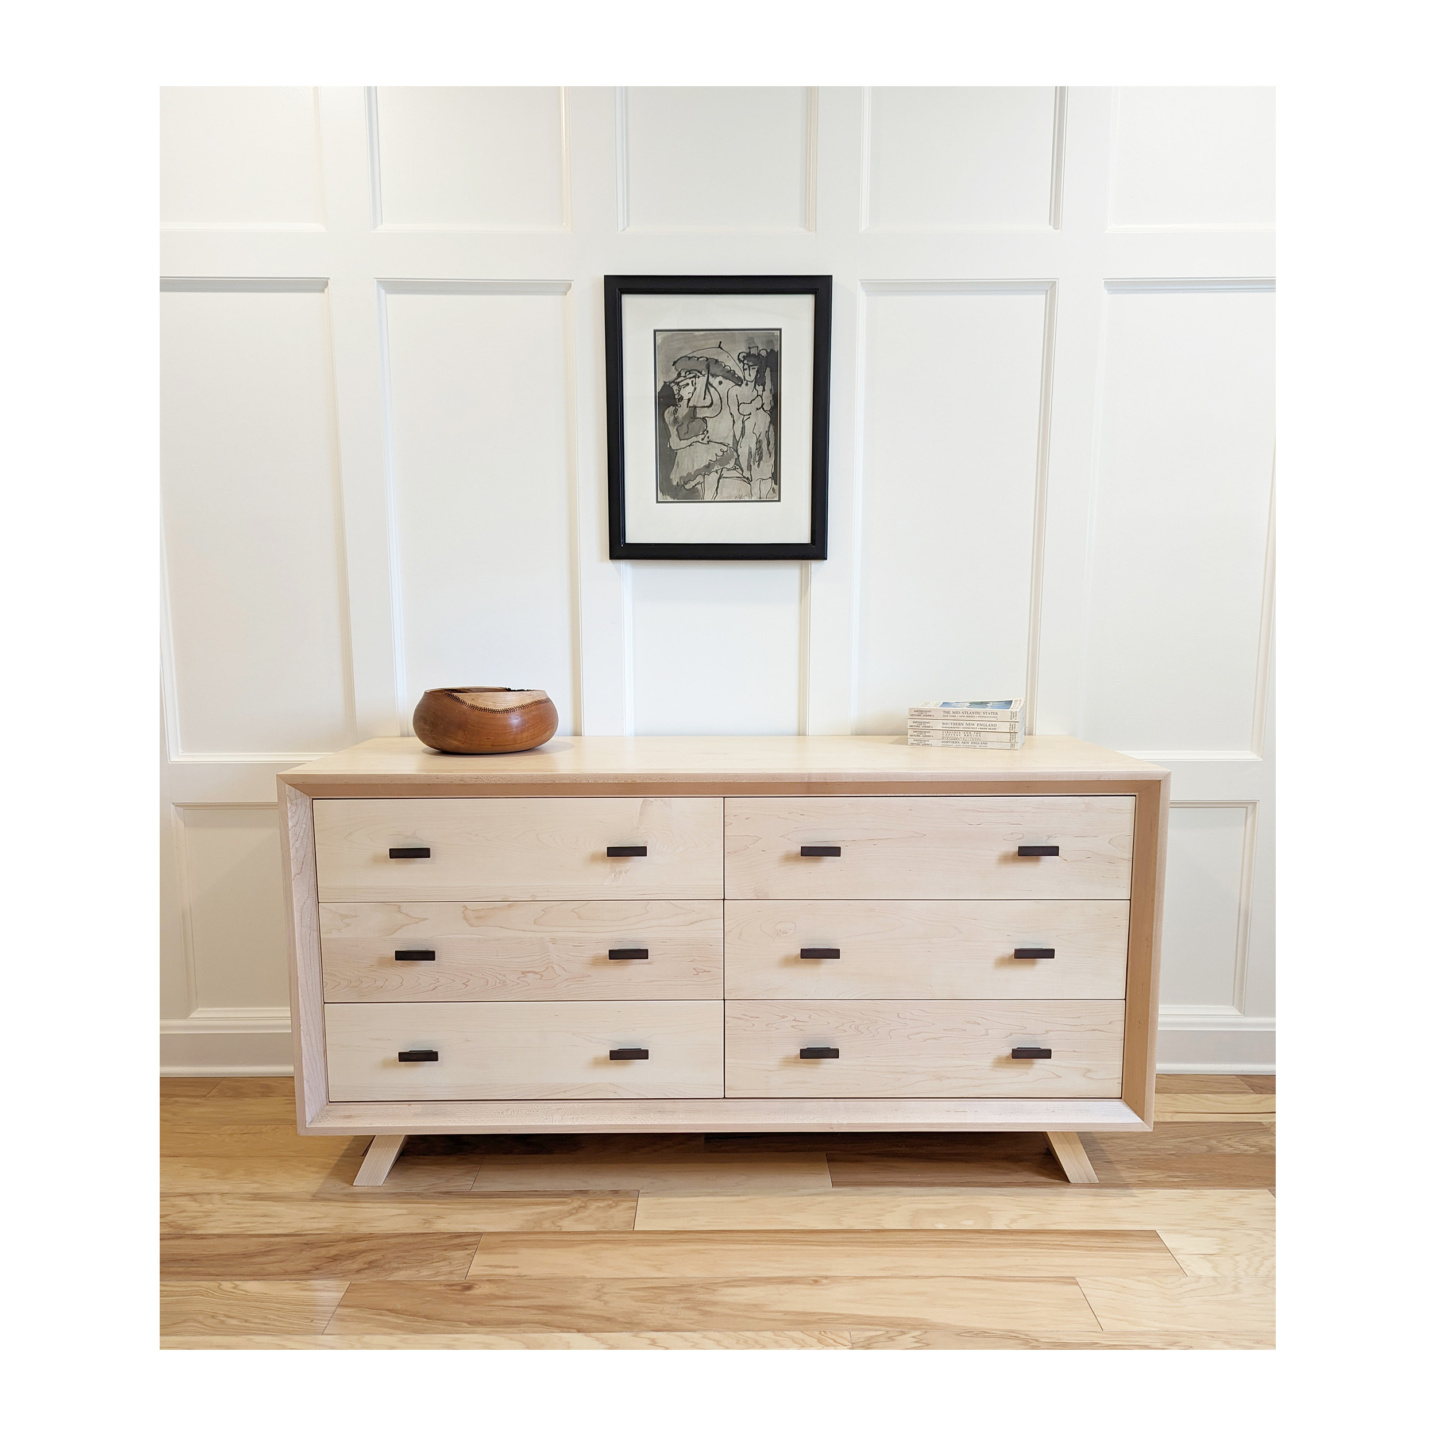 Six drawer dresser with a length of 60 inches made out of solid woods